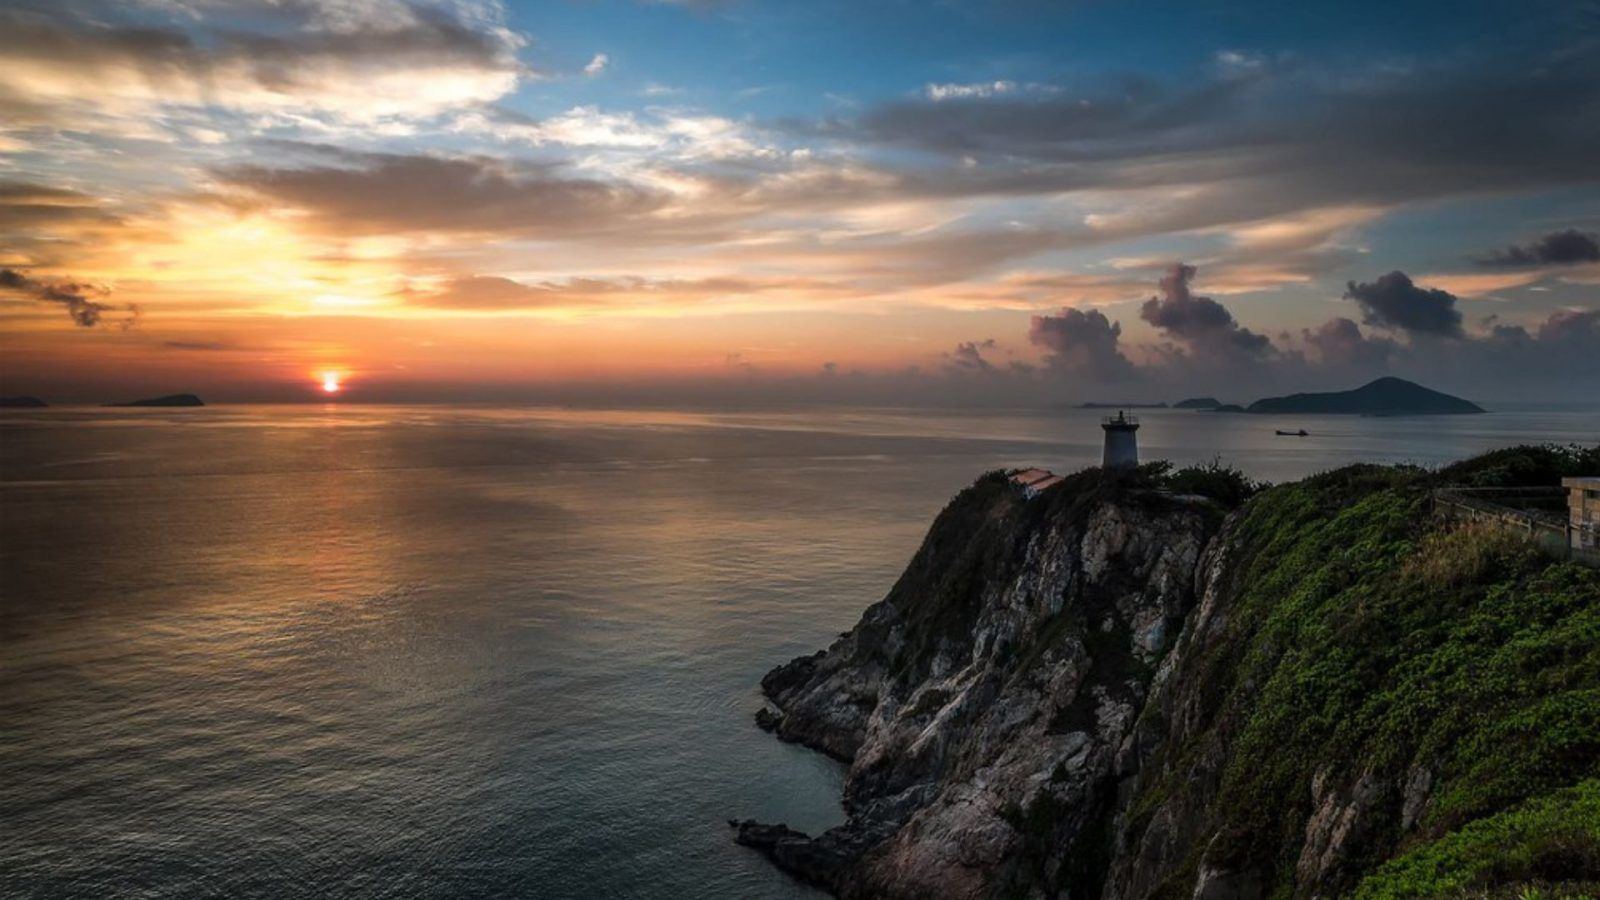 Best hiking trails in Hong Kong with picture-perfect views